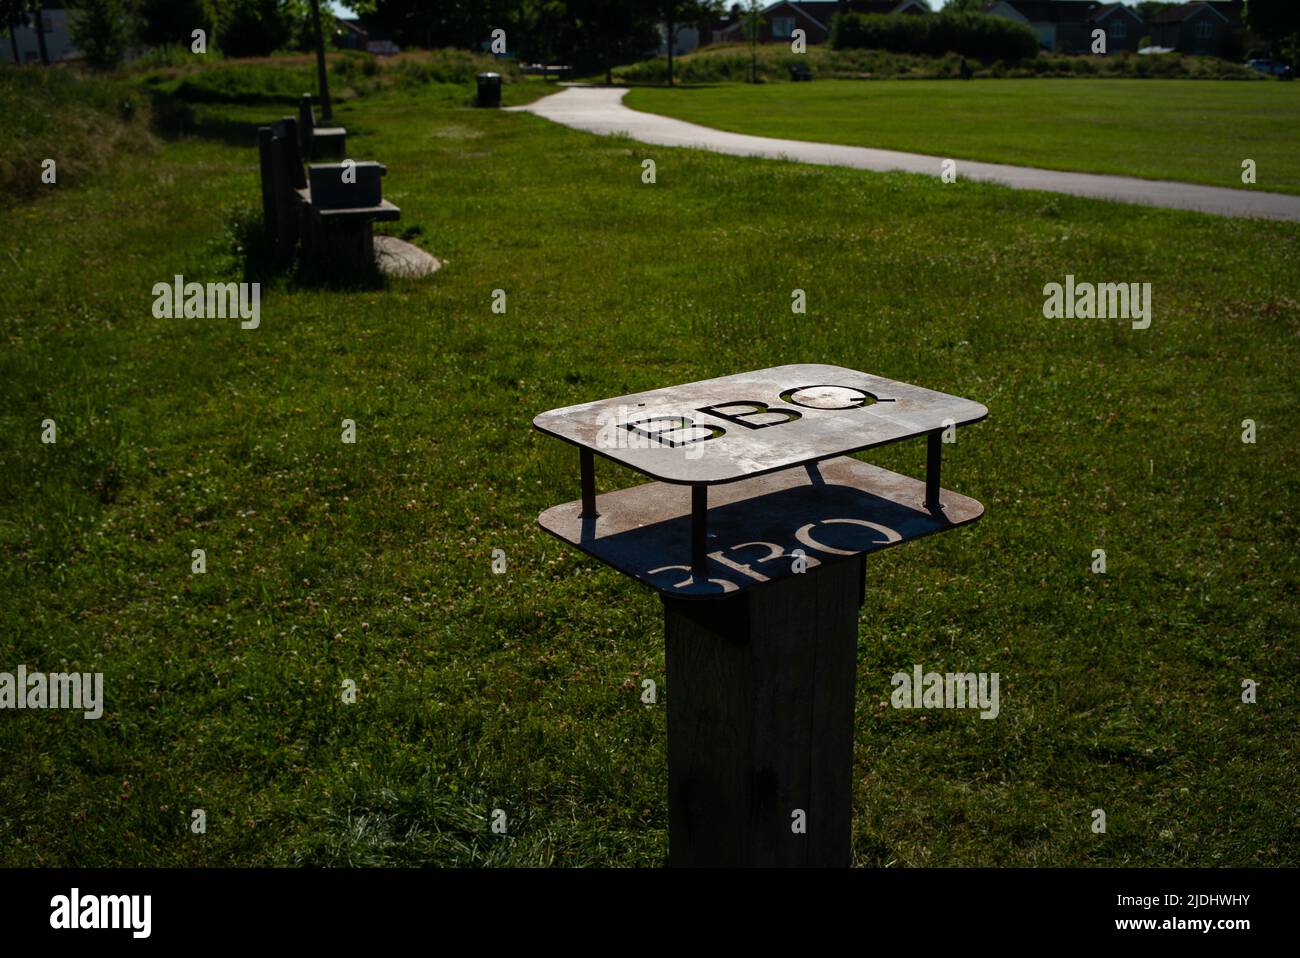 Metal barbecue safety stand for disposable barbecues in public park in Eastleigh near Southampton Hampshire England to prevent fires and accidents. Stock Photo